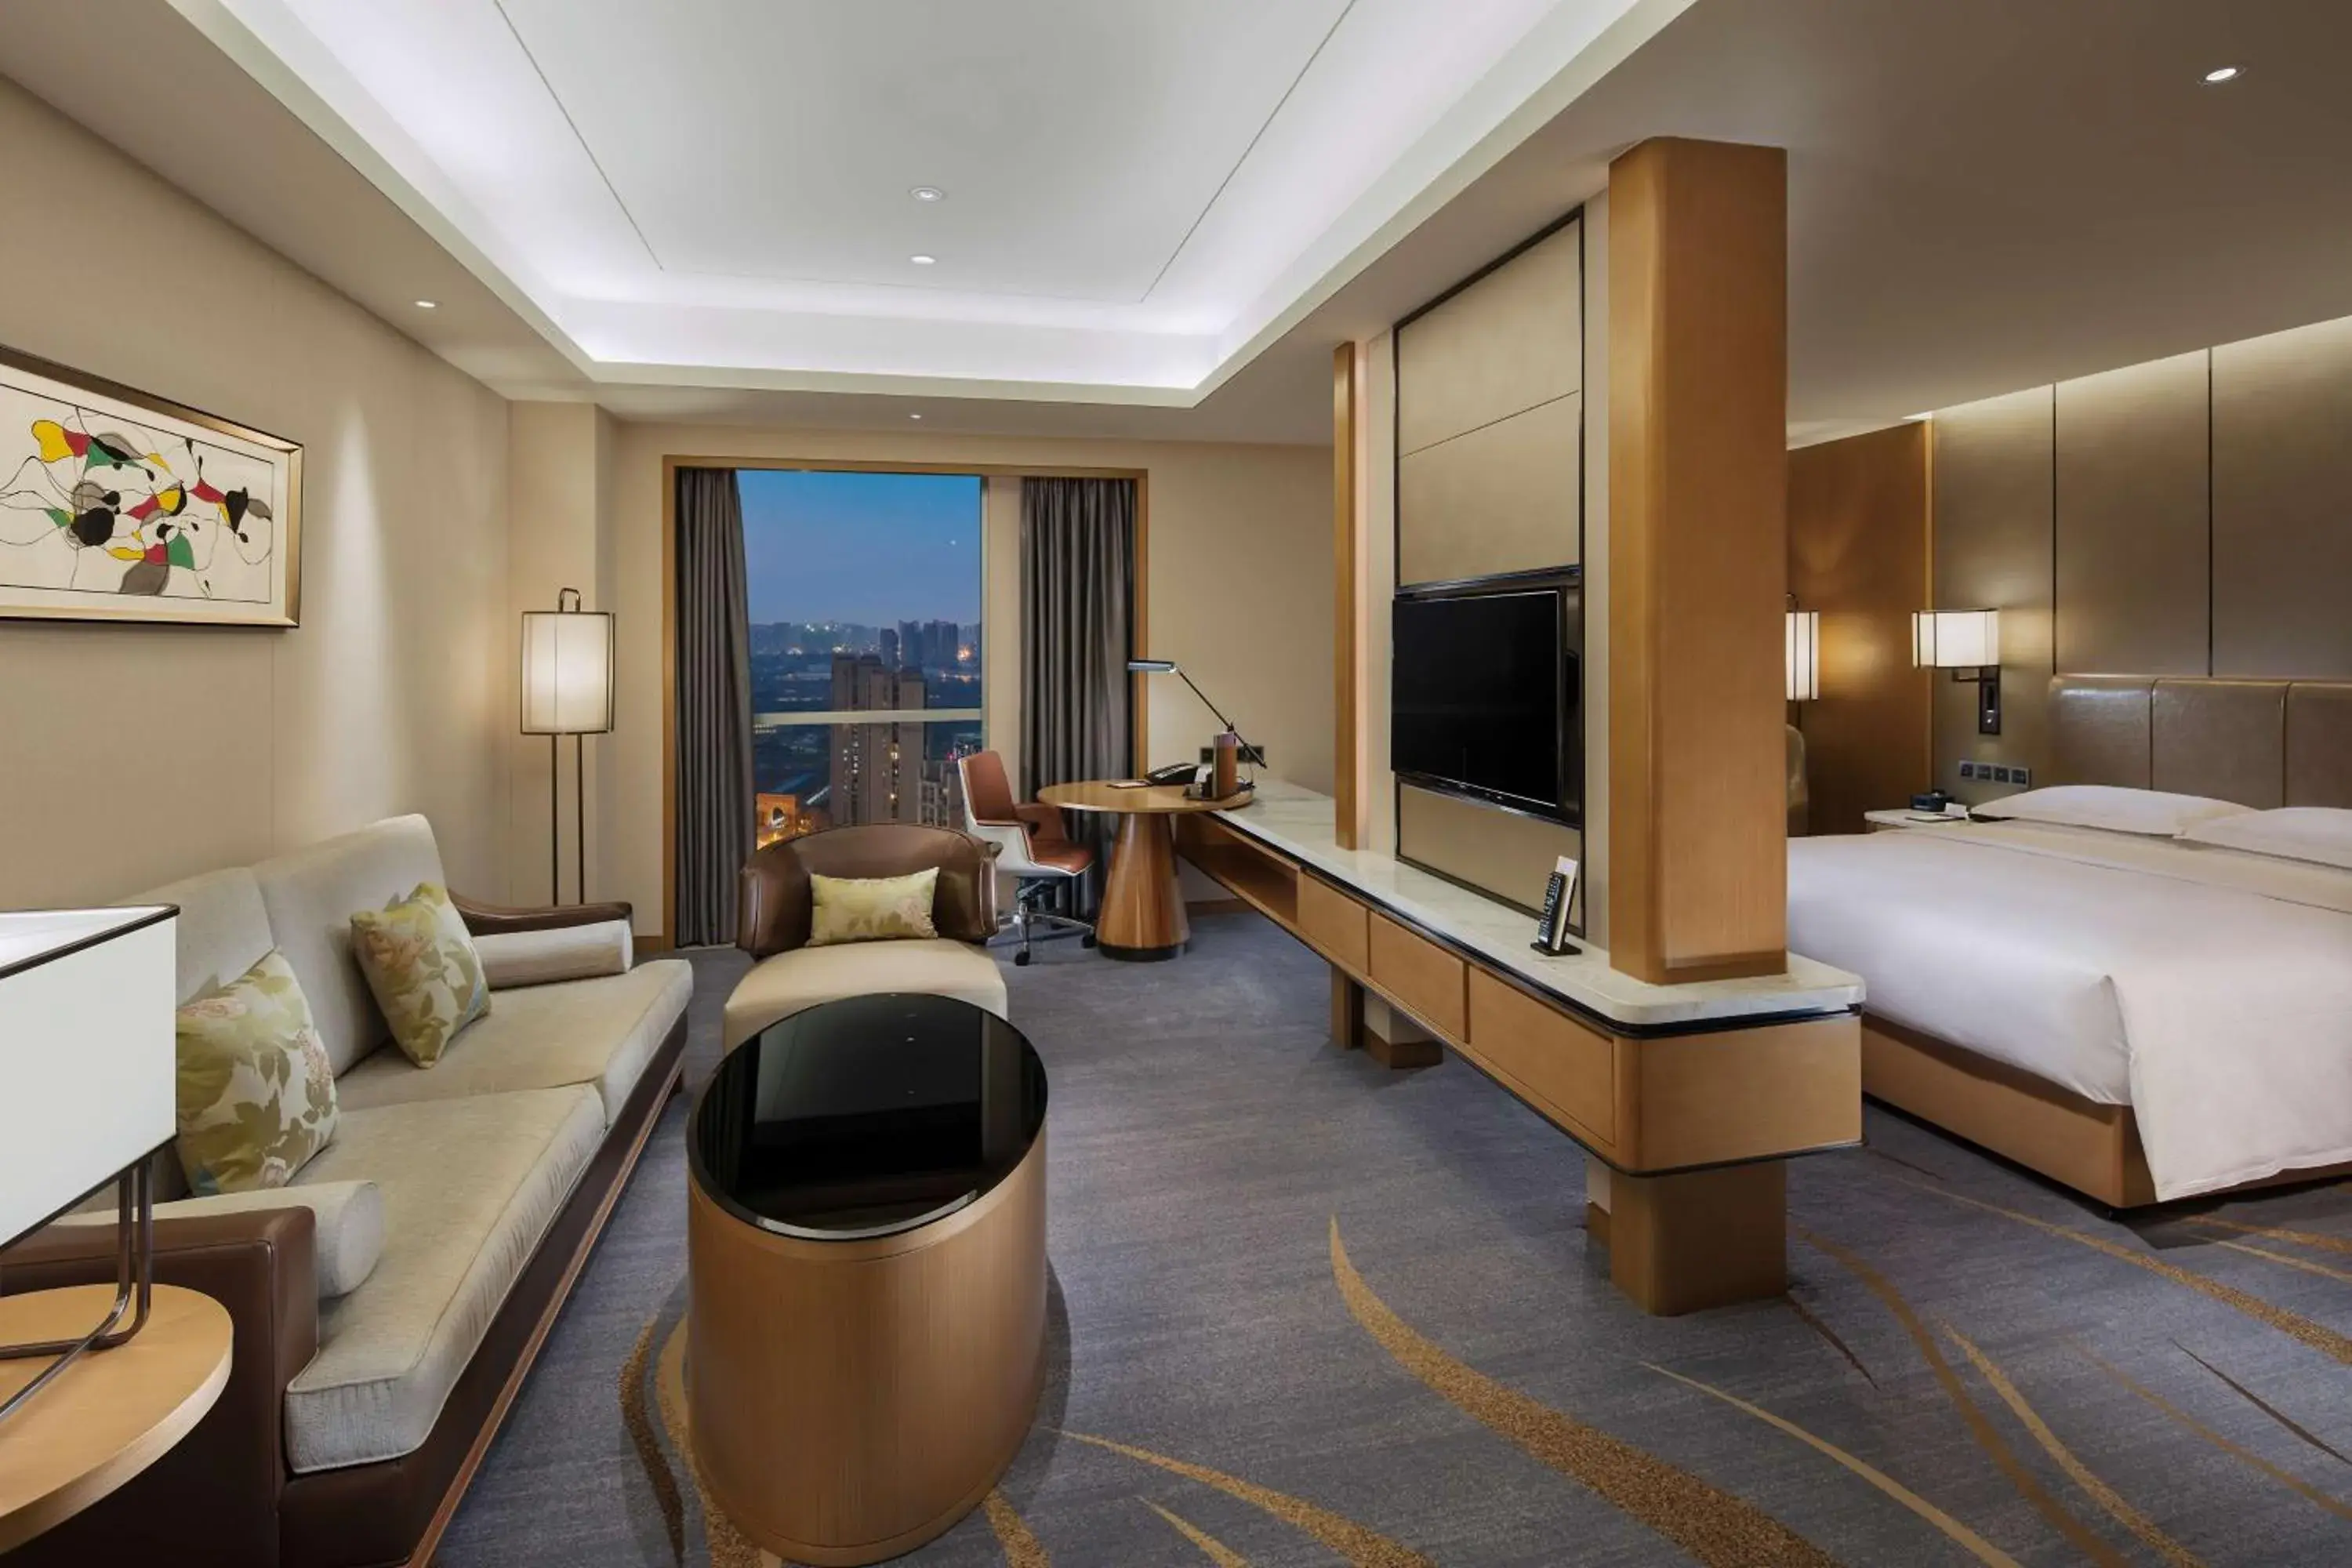 Bedroom in DoubleTree by Hilton Chengdu Longquanyi